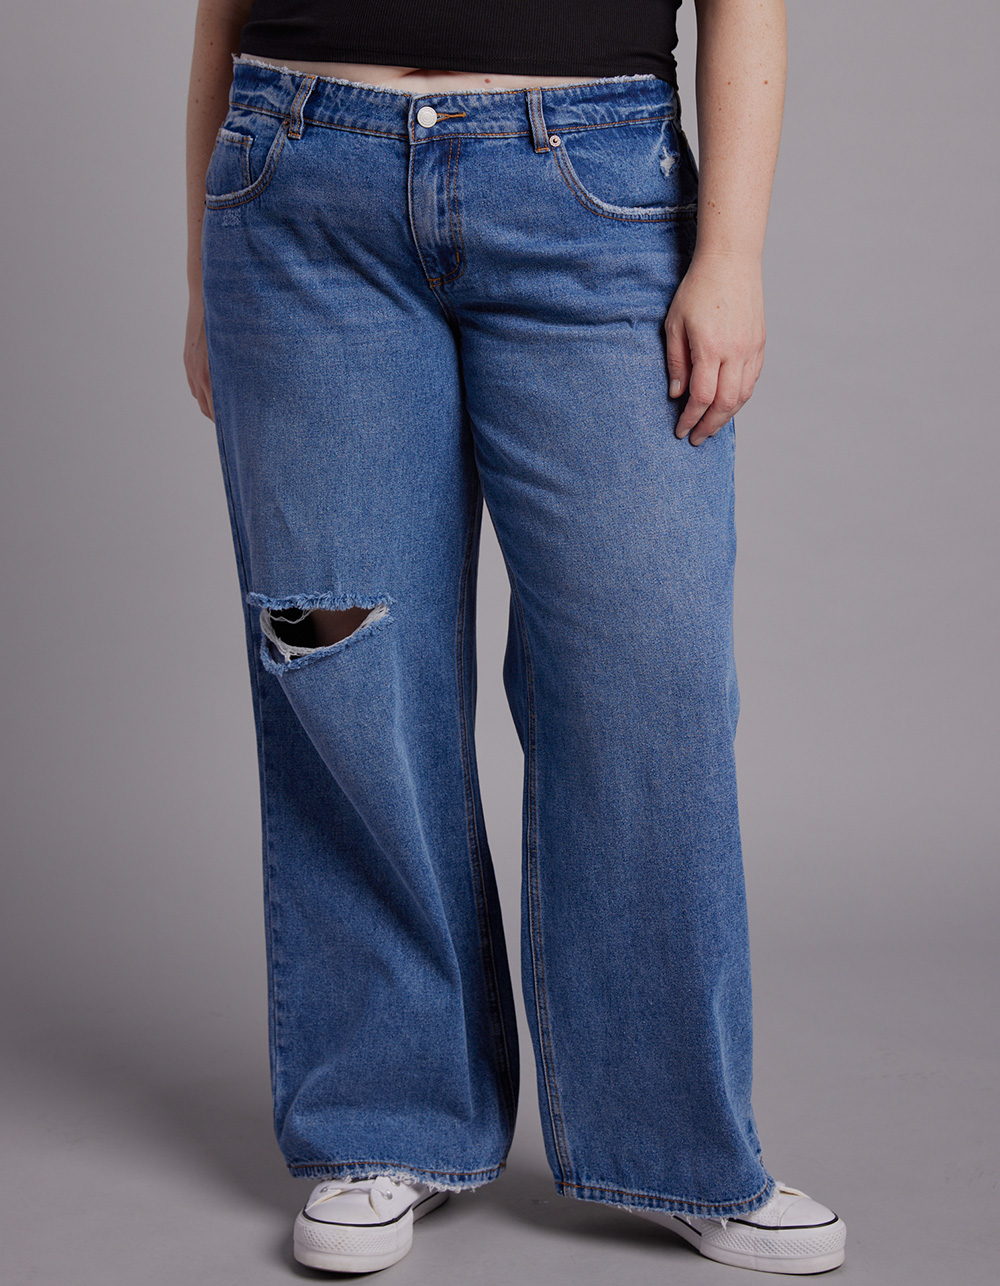 Low-Rise Jeans Are Back, and So Is My Emotional Baggage - PureWow